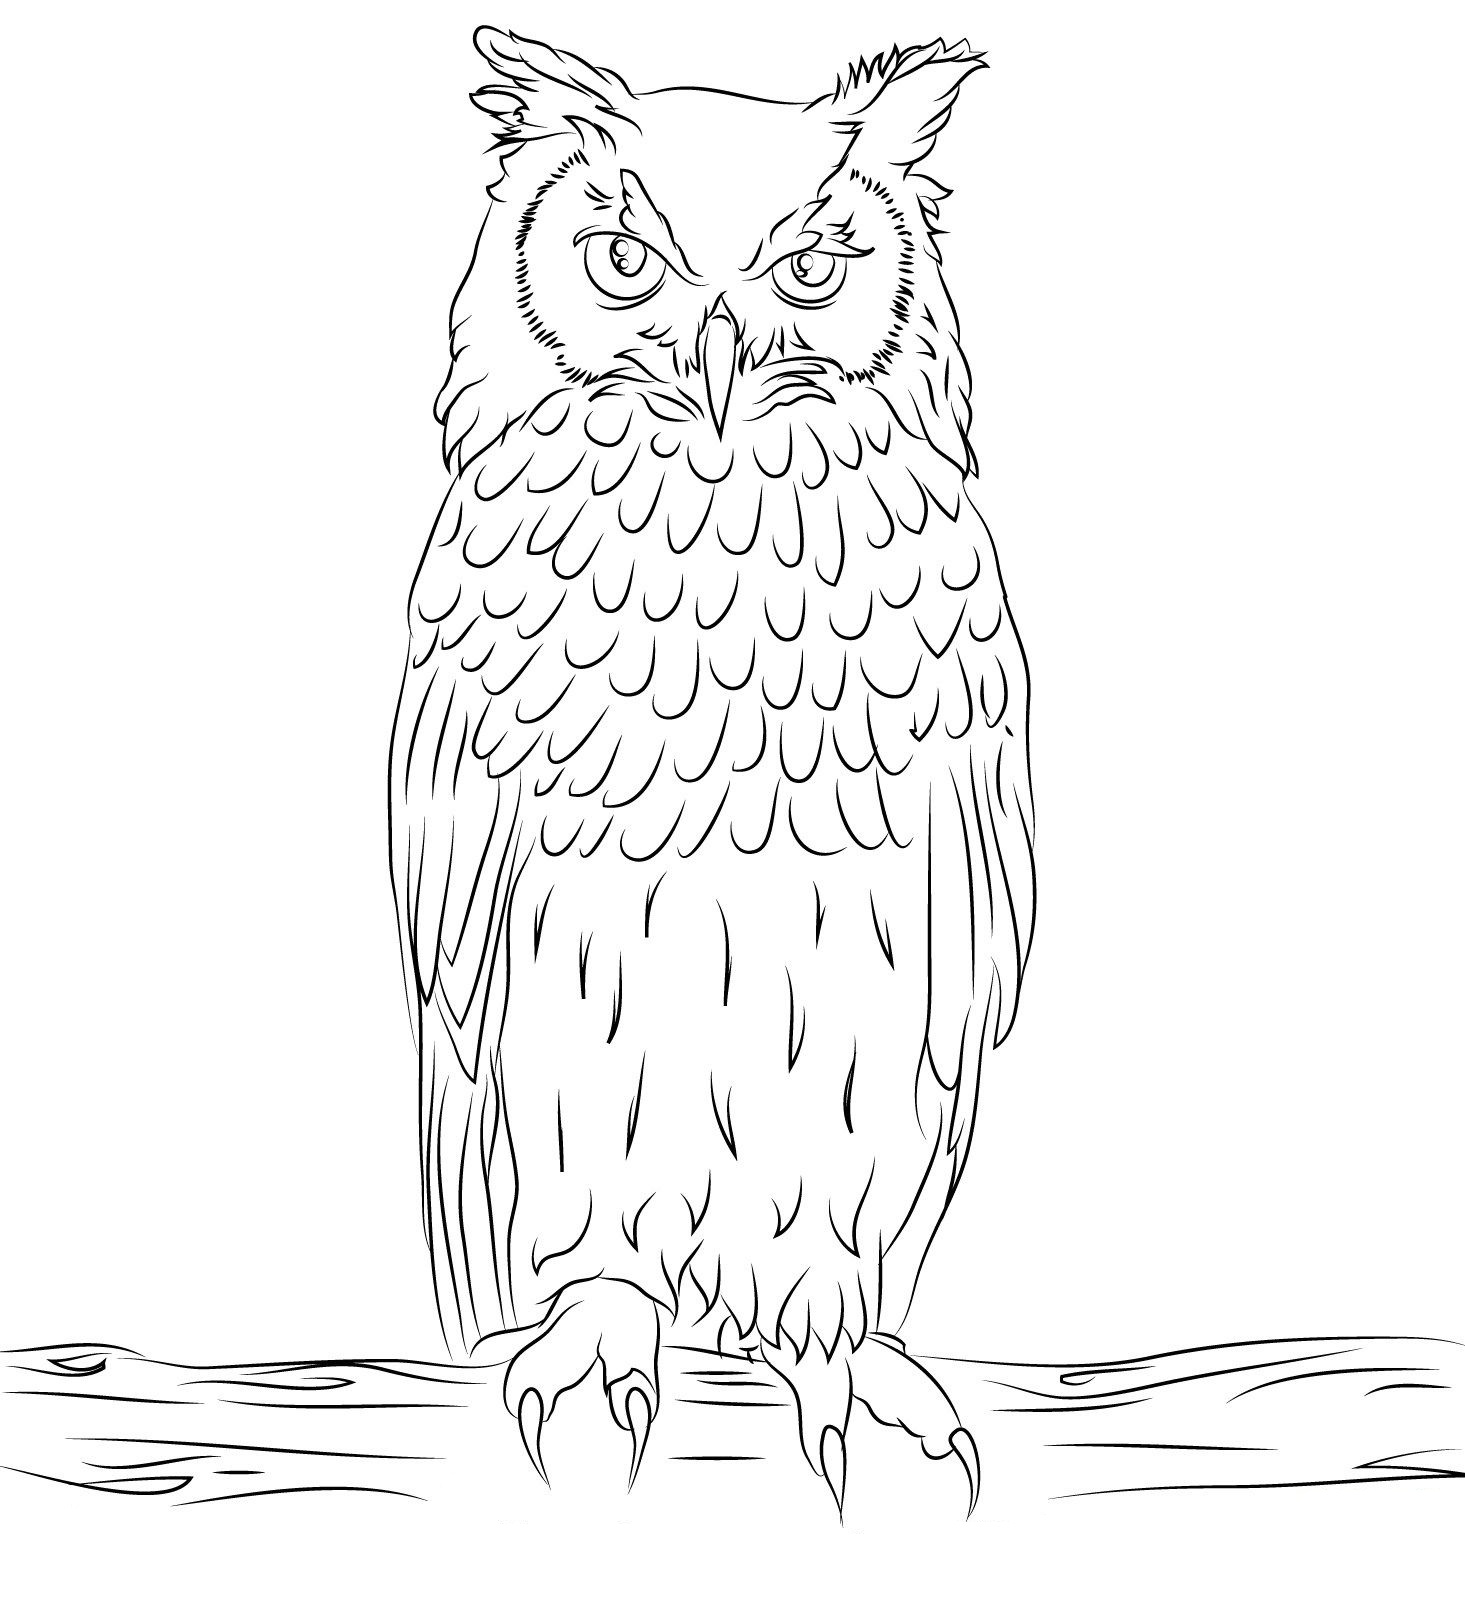   Owl Coloring Pages Online Best